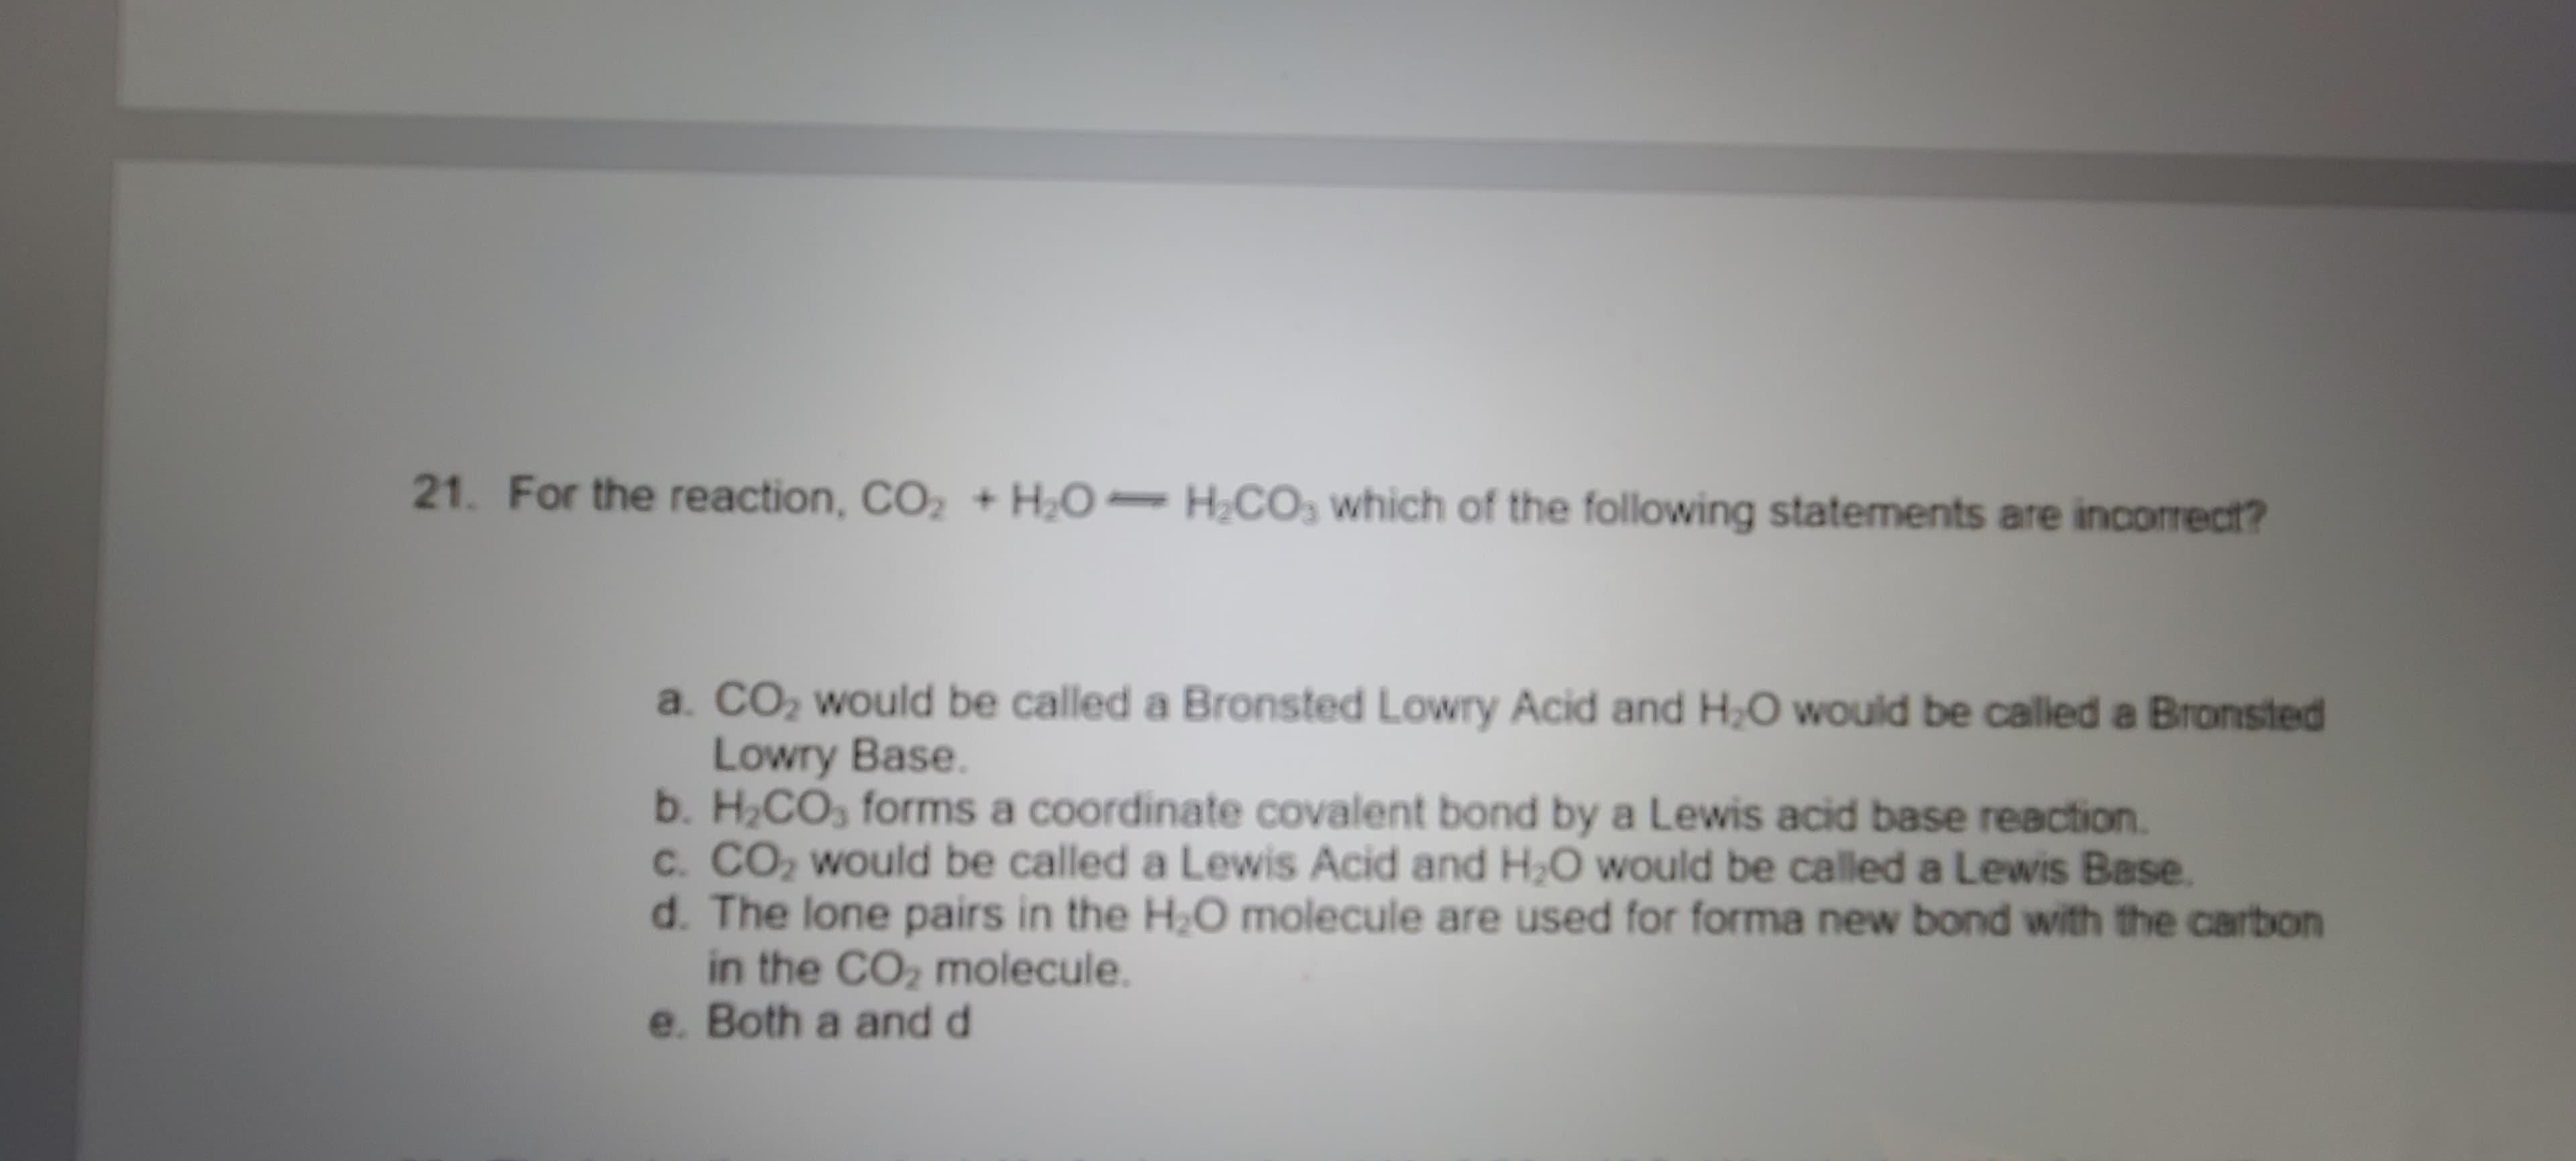 21. For the reaction, CO, + H0- H;CO, which of the following statements are incorrect?
a. CO, would be called a Bronsted Lowry Acid and H;O would be called a Bronsted
Lowry Base.
b. H,CO, forms a coordinate covalent bond by a Lewis acid base reaction.
c. CO, would be called a Lewis Acid and H,O would be called a Lewis Base.
d. The lone pairs in the H;O molecule are used for forma new bond with the carbon
in the CO, molecule.
e. Both a and d
